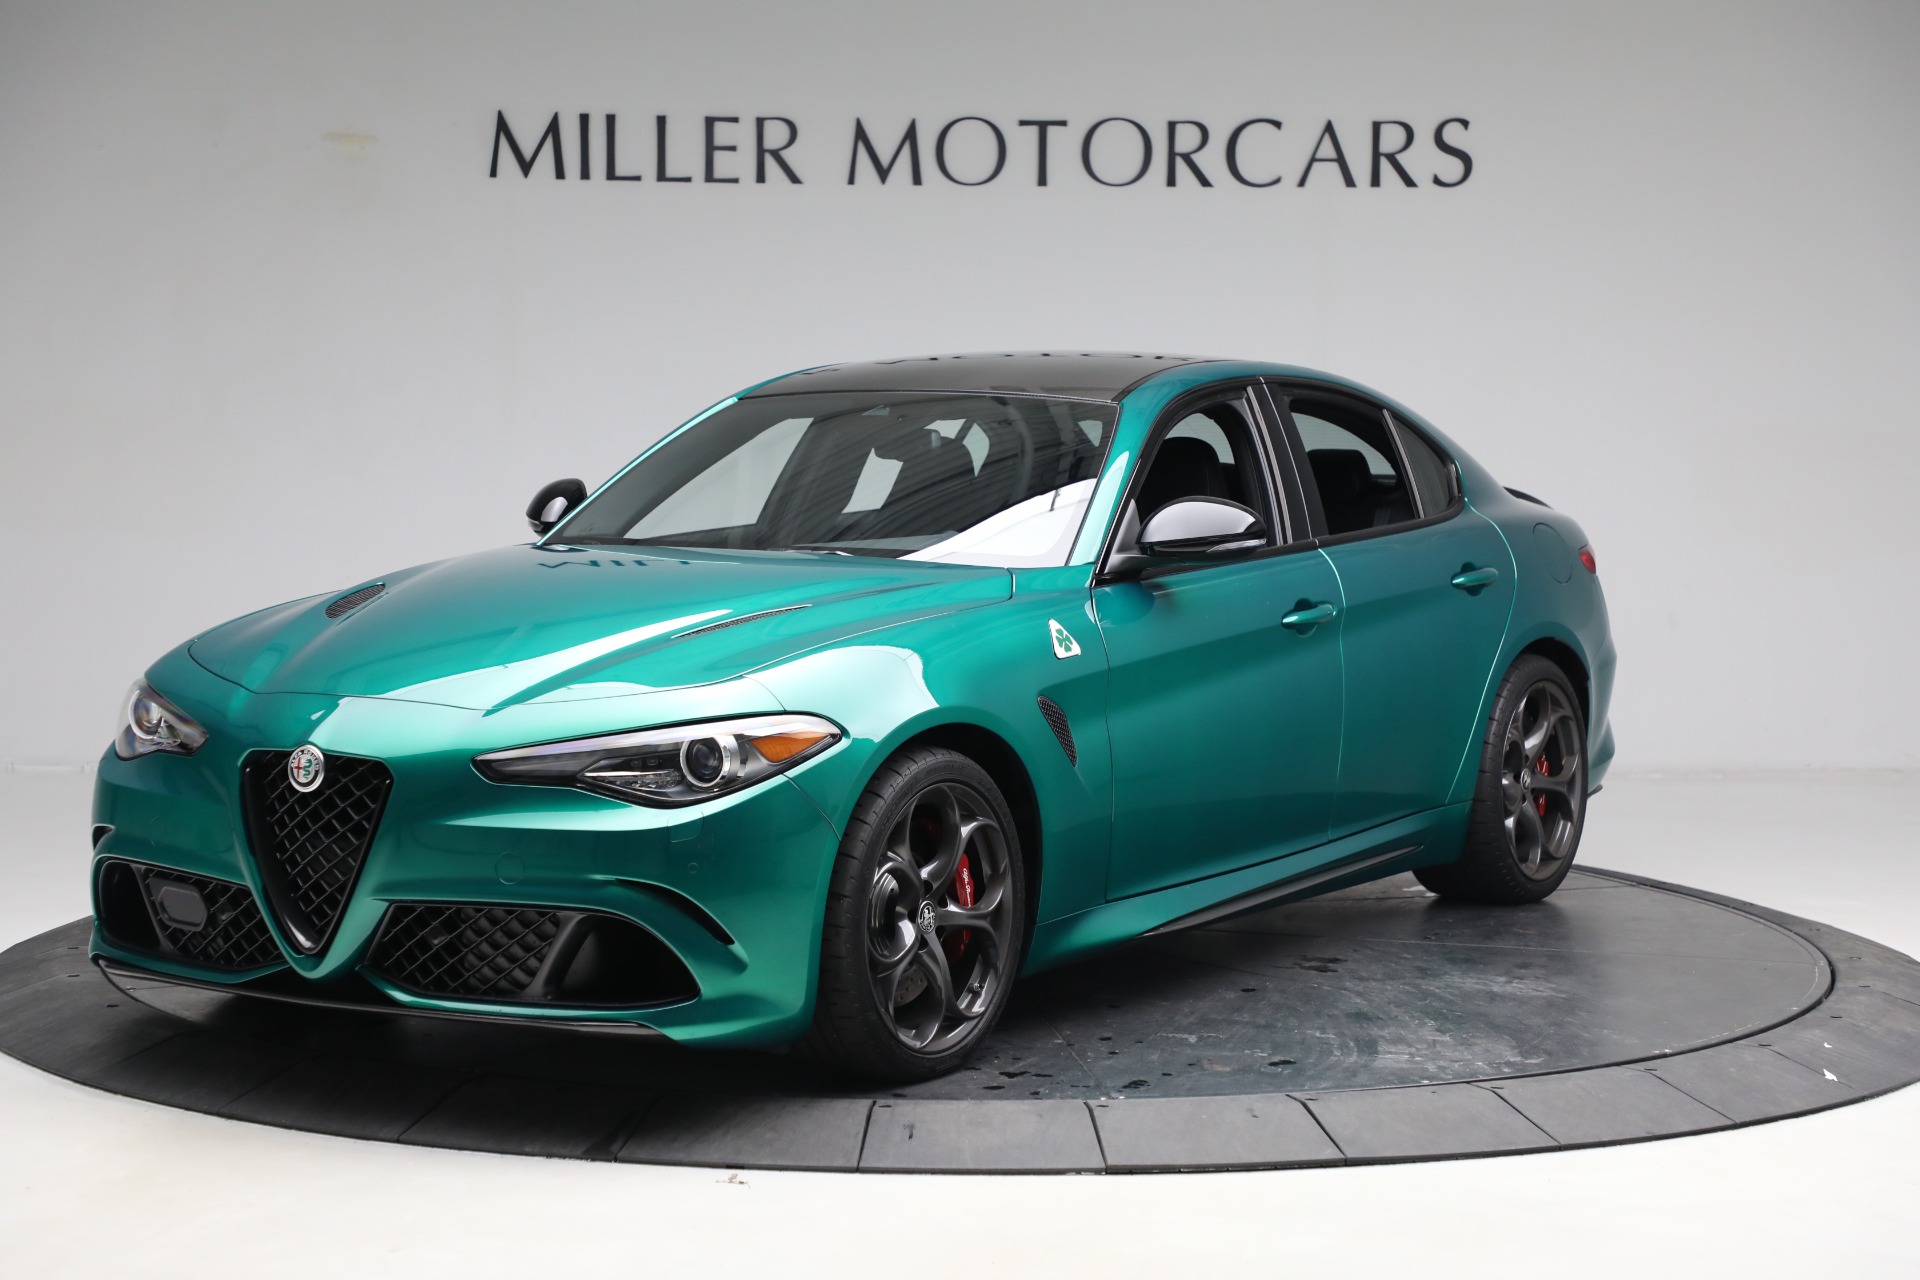 Alfa Romeo Giulia for Sale: Overview of Model Features, Specifications, and  Available Inventory - Miller Motorcars